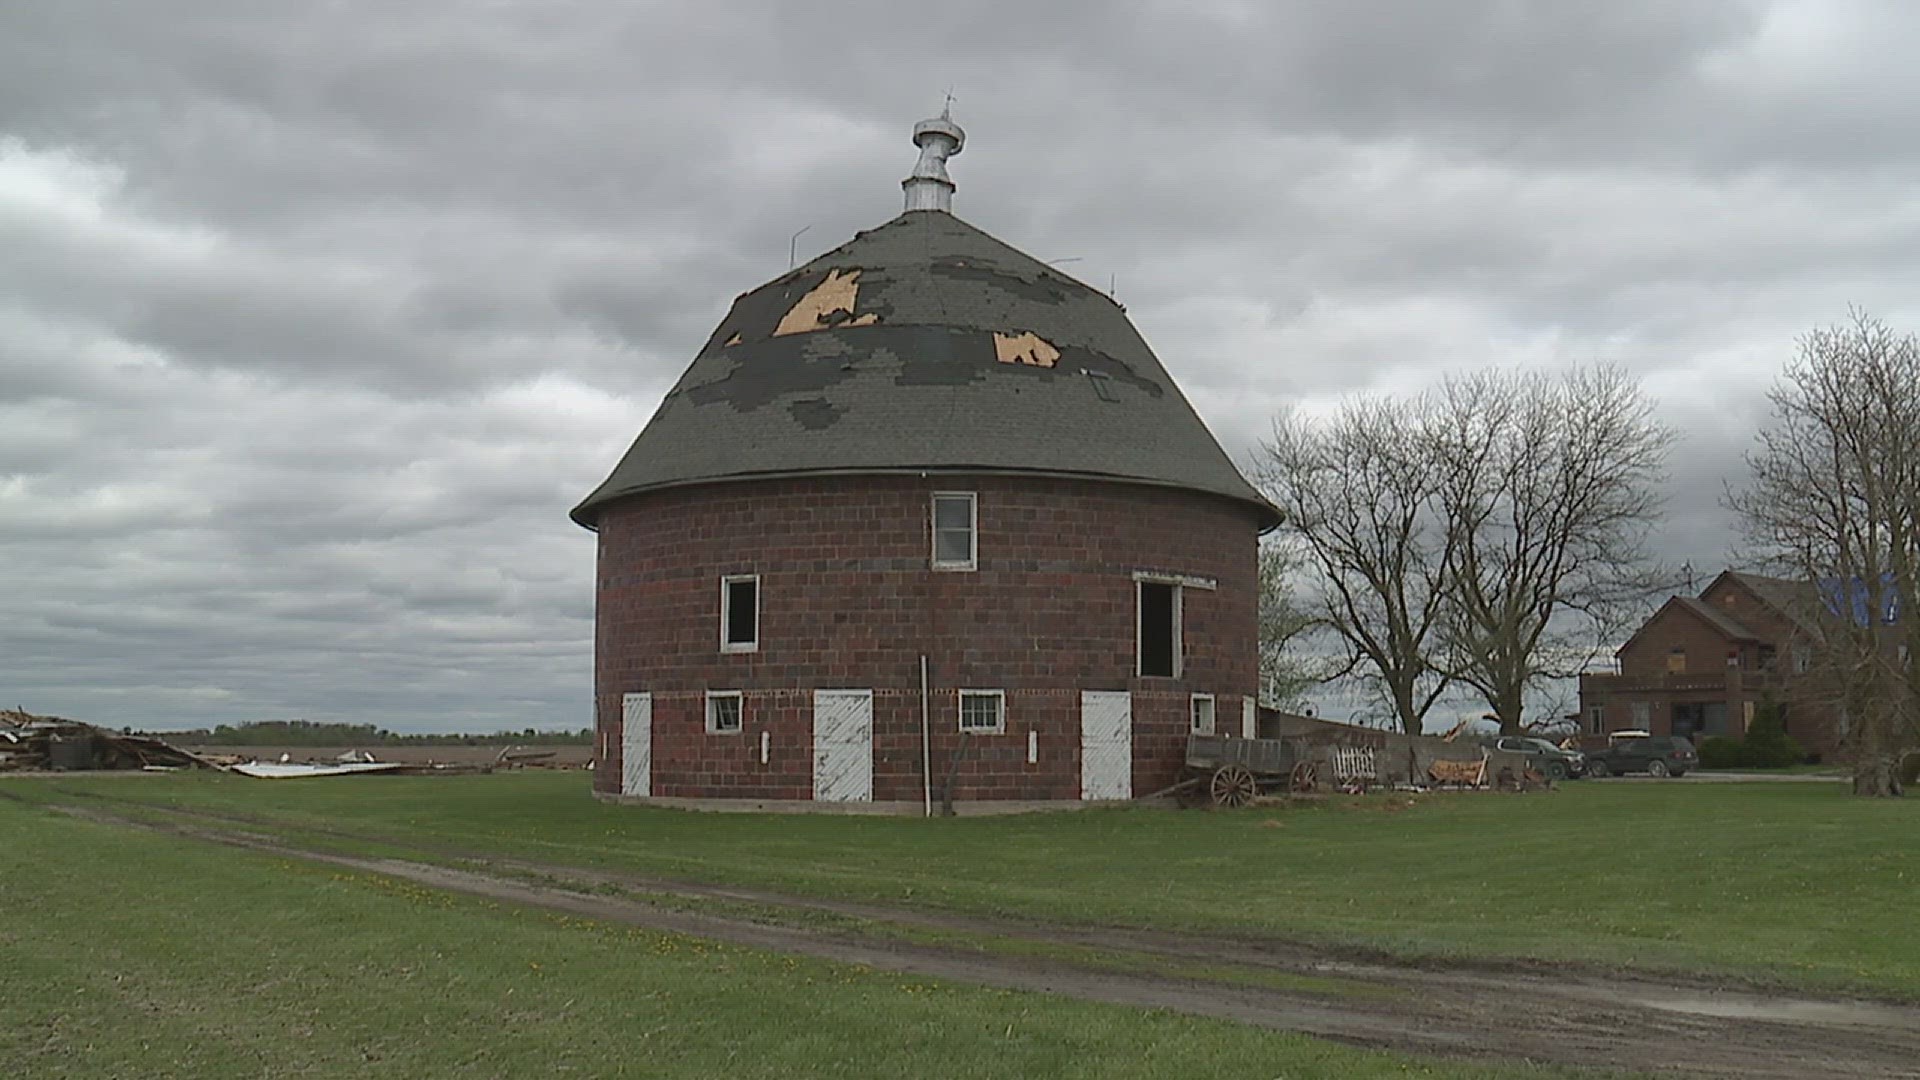 The Holtkamp Round Barn had its steeple cracked, and shingles were also torn off.